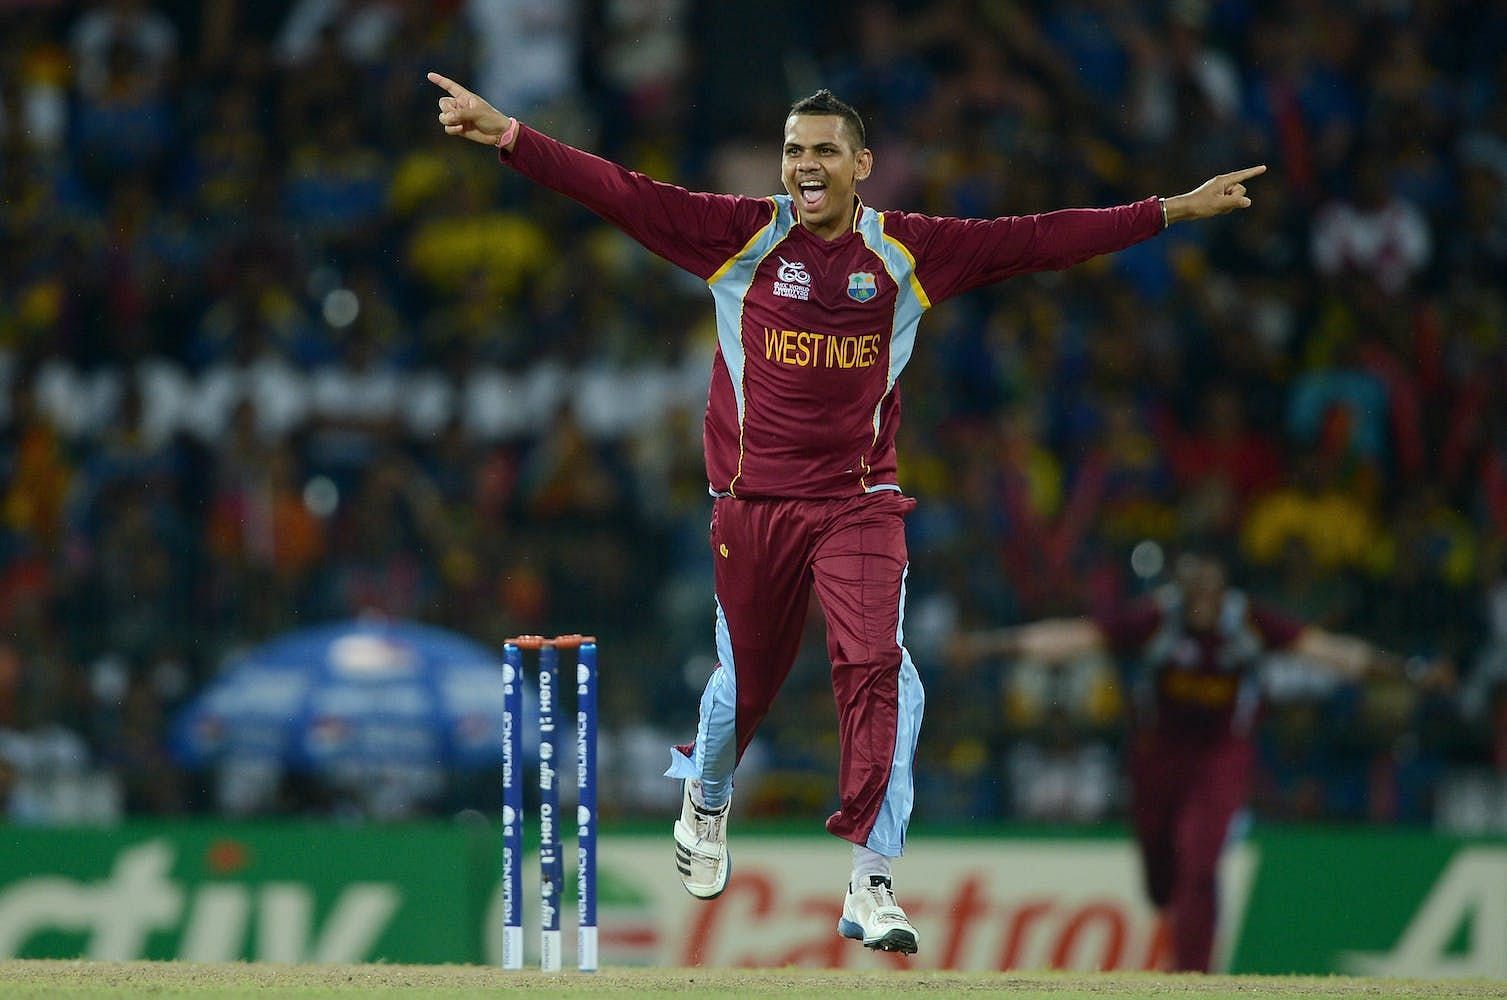 Sunil Narine loved bowling against New Zealand (Image via Getty)